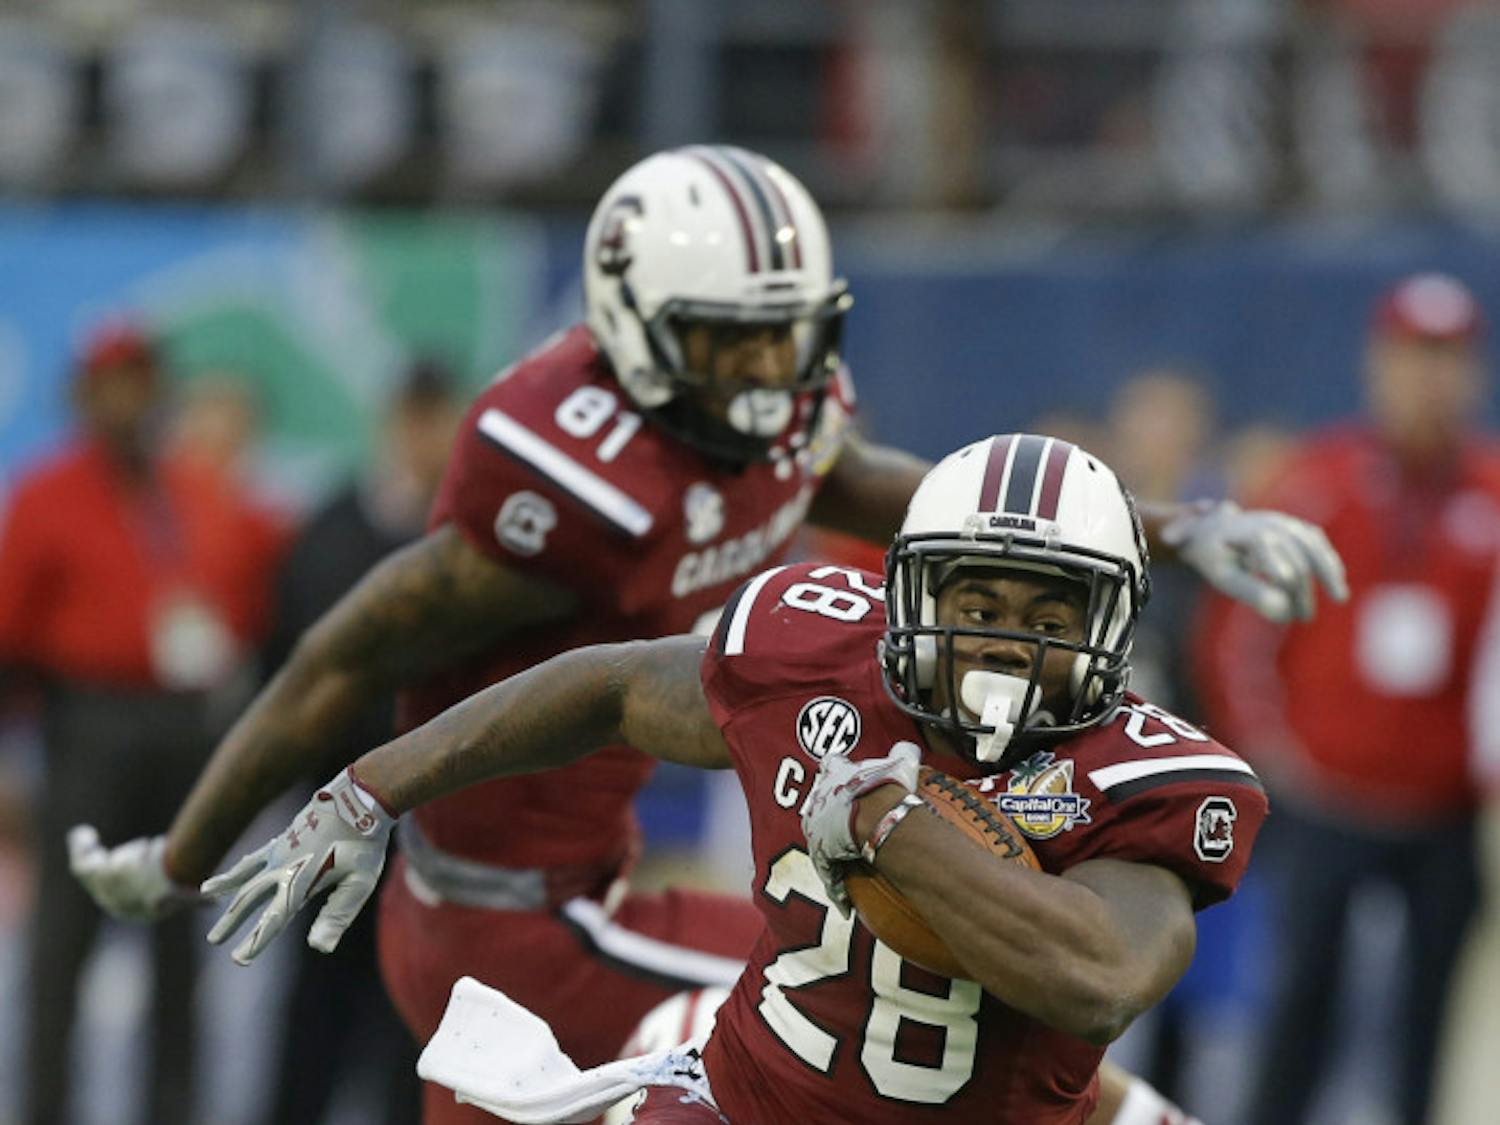 In this Jan. 1, 2014, file photo, South Carolina running back Mike Davis (28) gains yardage against Wisconsin during the second half of the Capital One Bowl NCAA college football game in Orlando, Fla. Steve Spurrier says 1,000-yard rusher Mike Davis hadn't practiced last week and might not be ready when the ninth-ranked Gamecocks open the season against No. 21 Texas A&amp;M tonight.